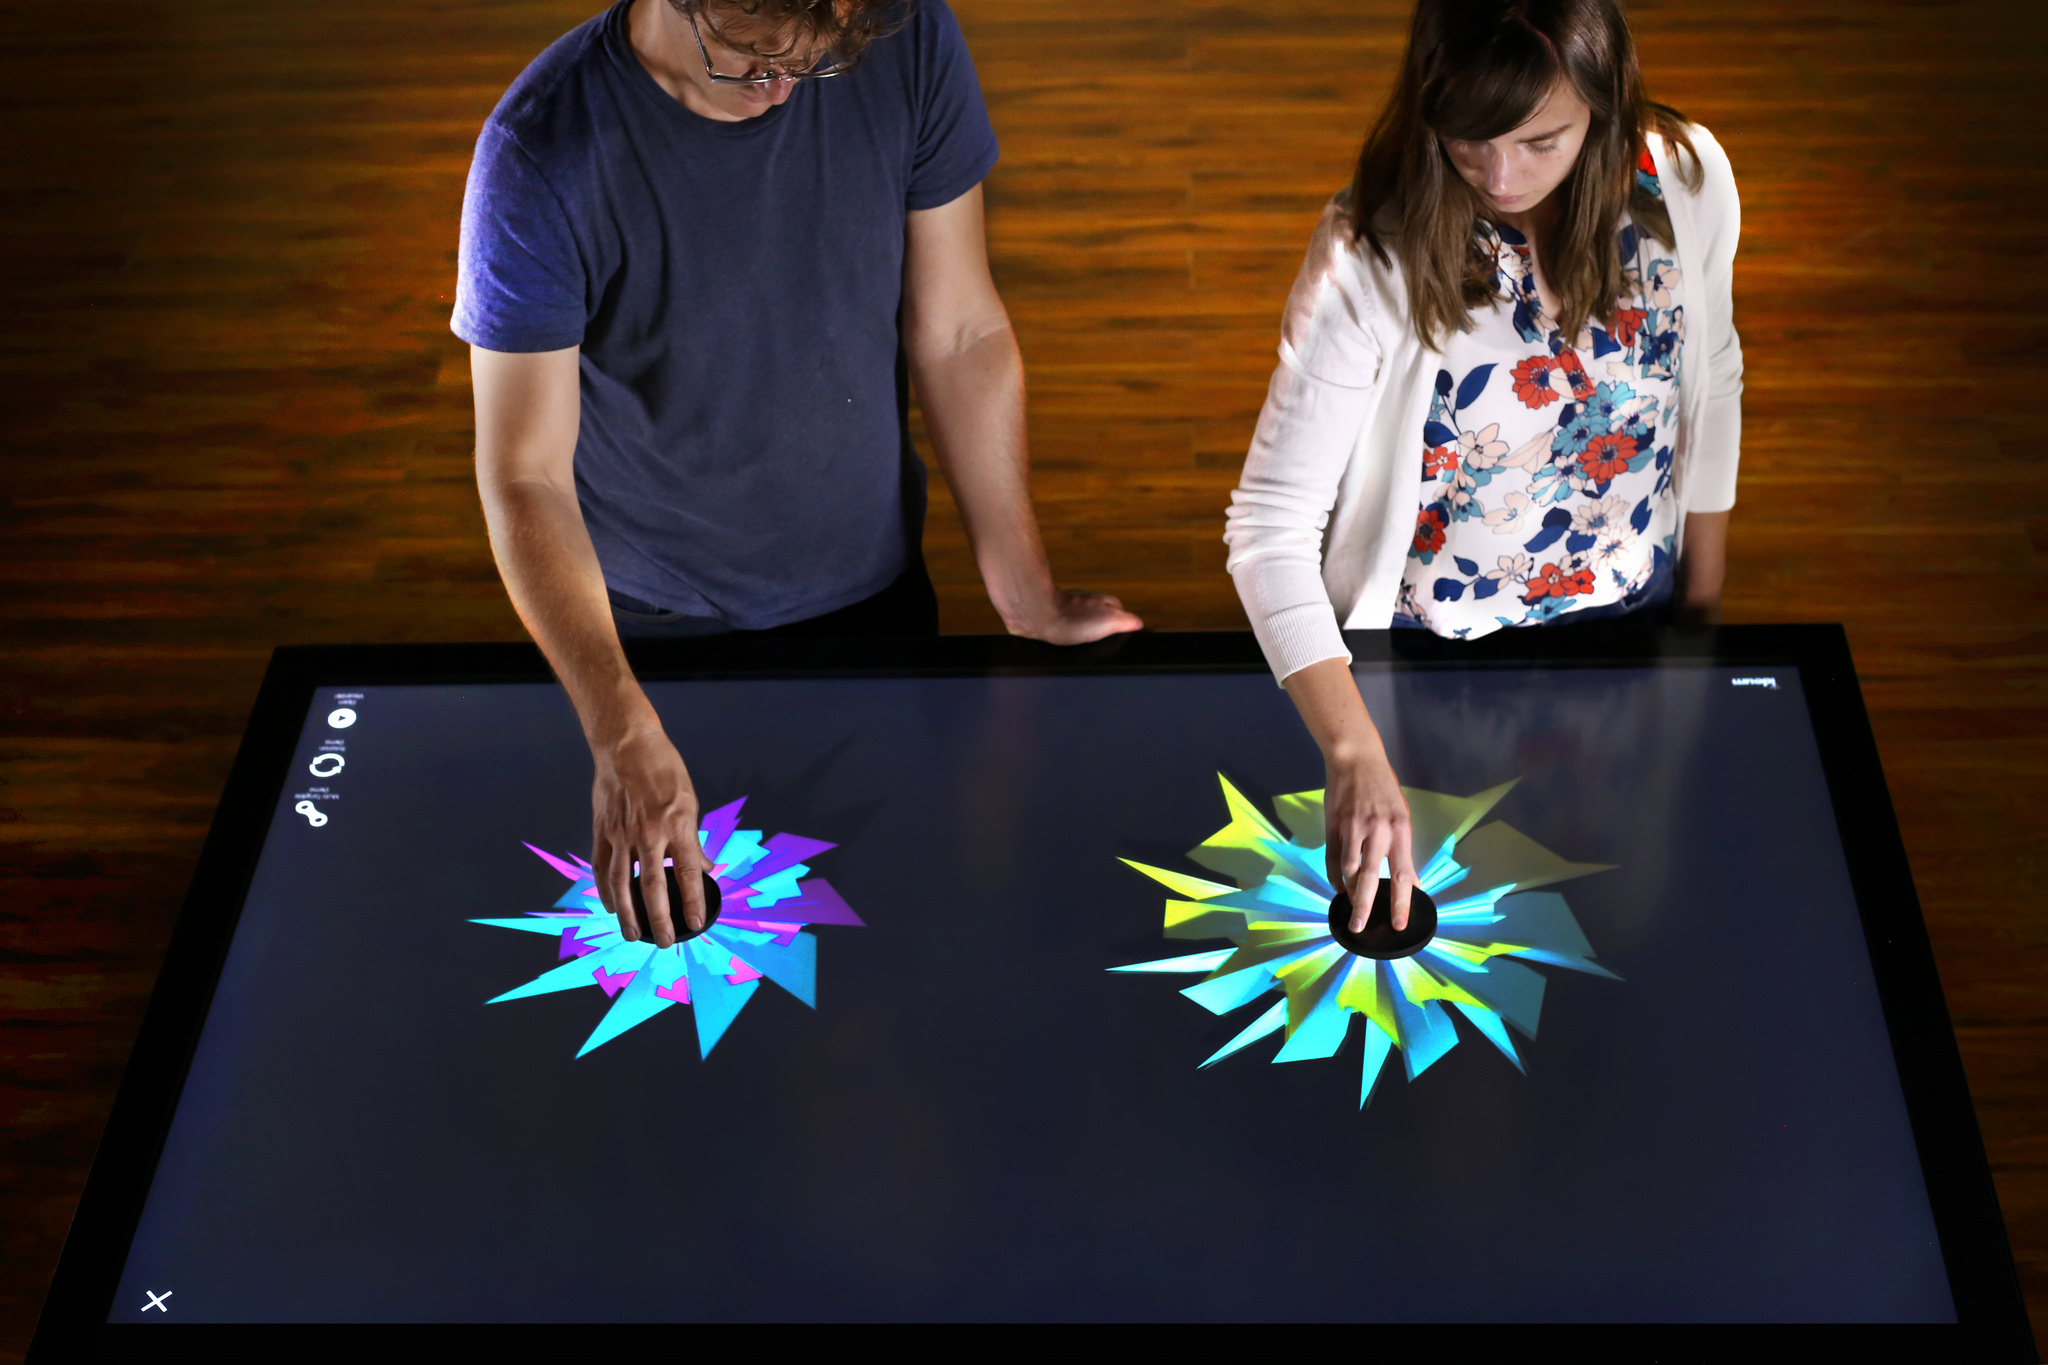 Tangible Engine 2 - Object Recognition for Ideum Touch Tables